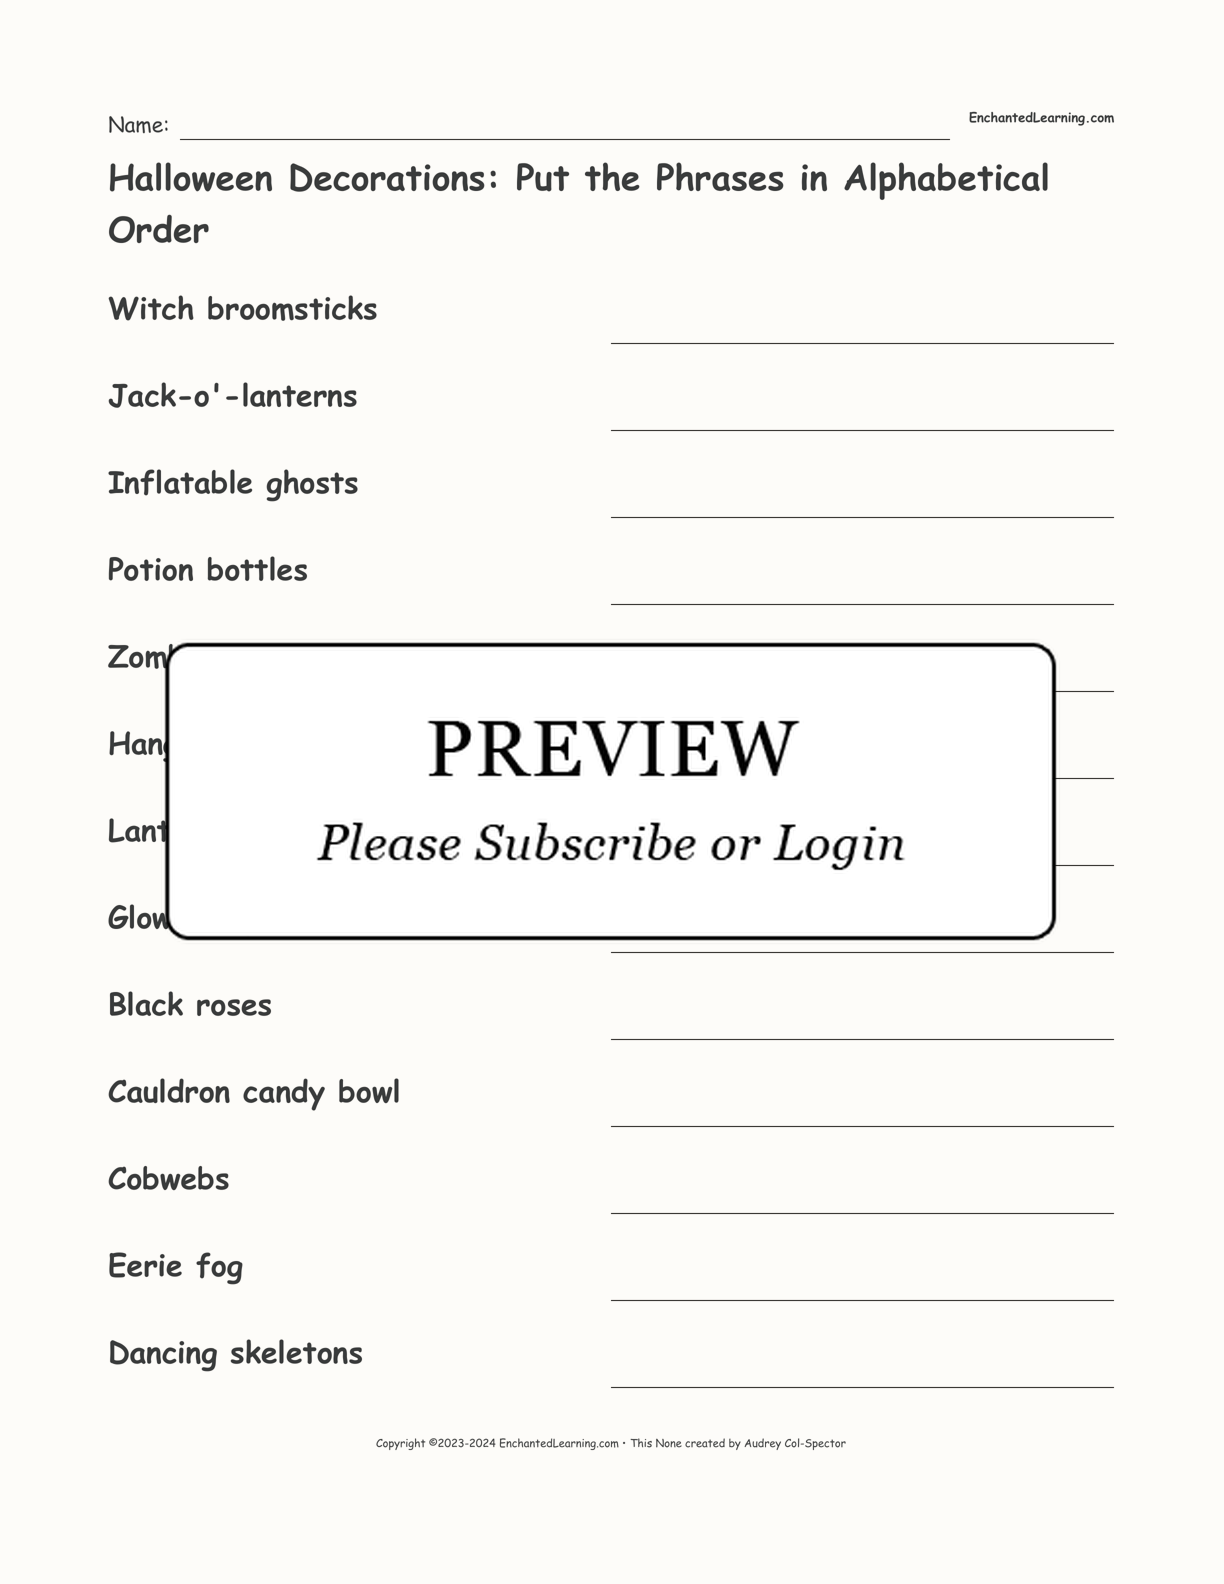 Halloween Decorations: Put the Phrases in Alphabetical Order interactive worksheet page 1